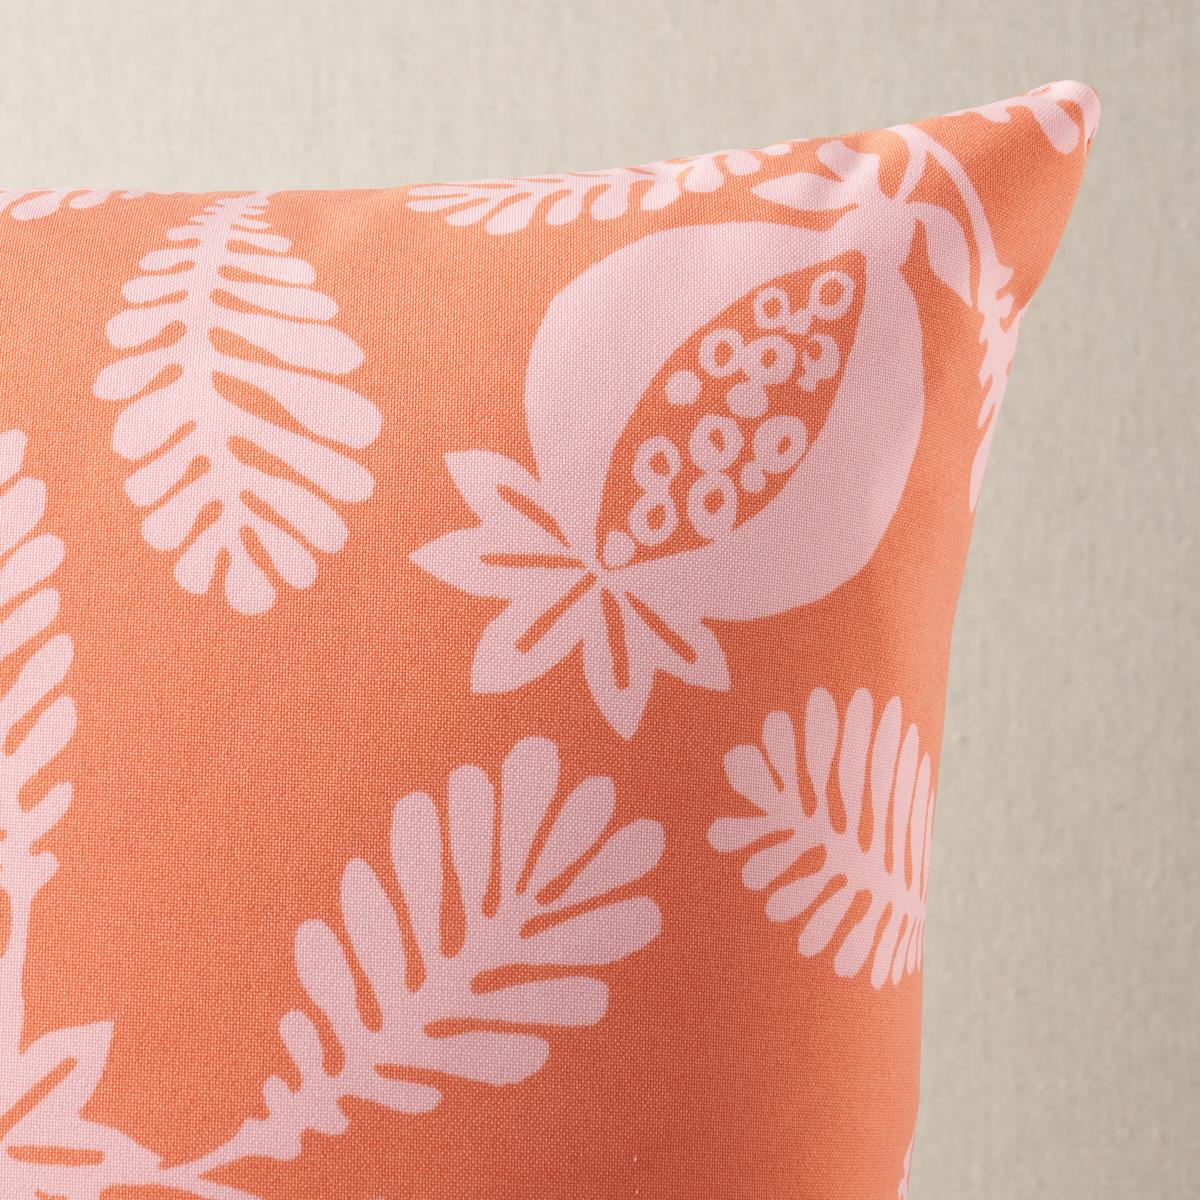 This pillow features Lanzadera Vine Indoor/Outdoor with a knife edge finish. A versatile allover print, Lanzadera Vine Indoor/Outdoor in melon is a modern mid-scale silhouette design. What’s more, this winding pomegranate pattern is printed on a